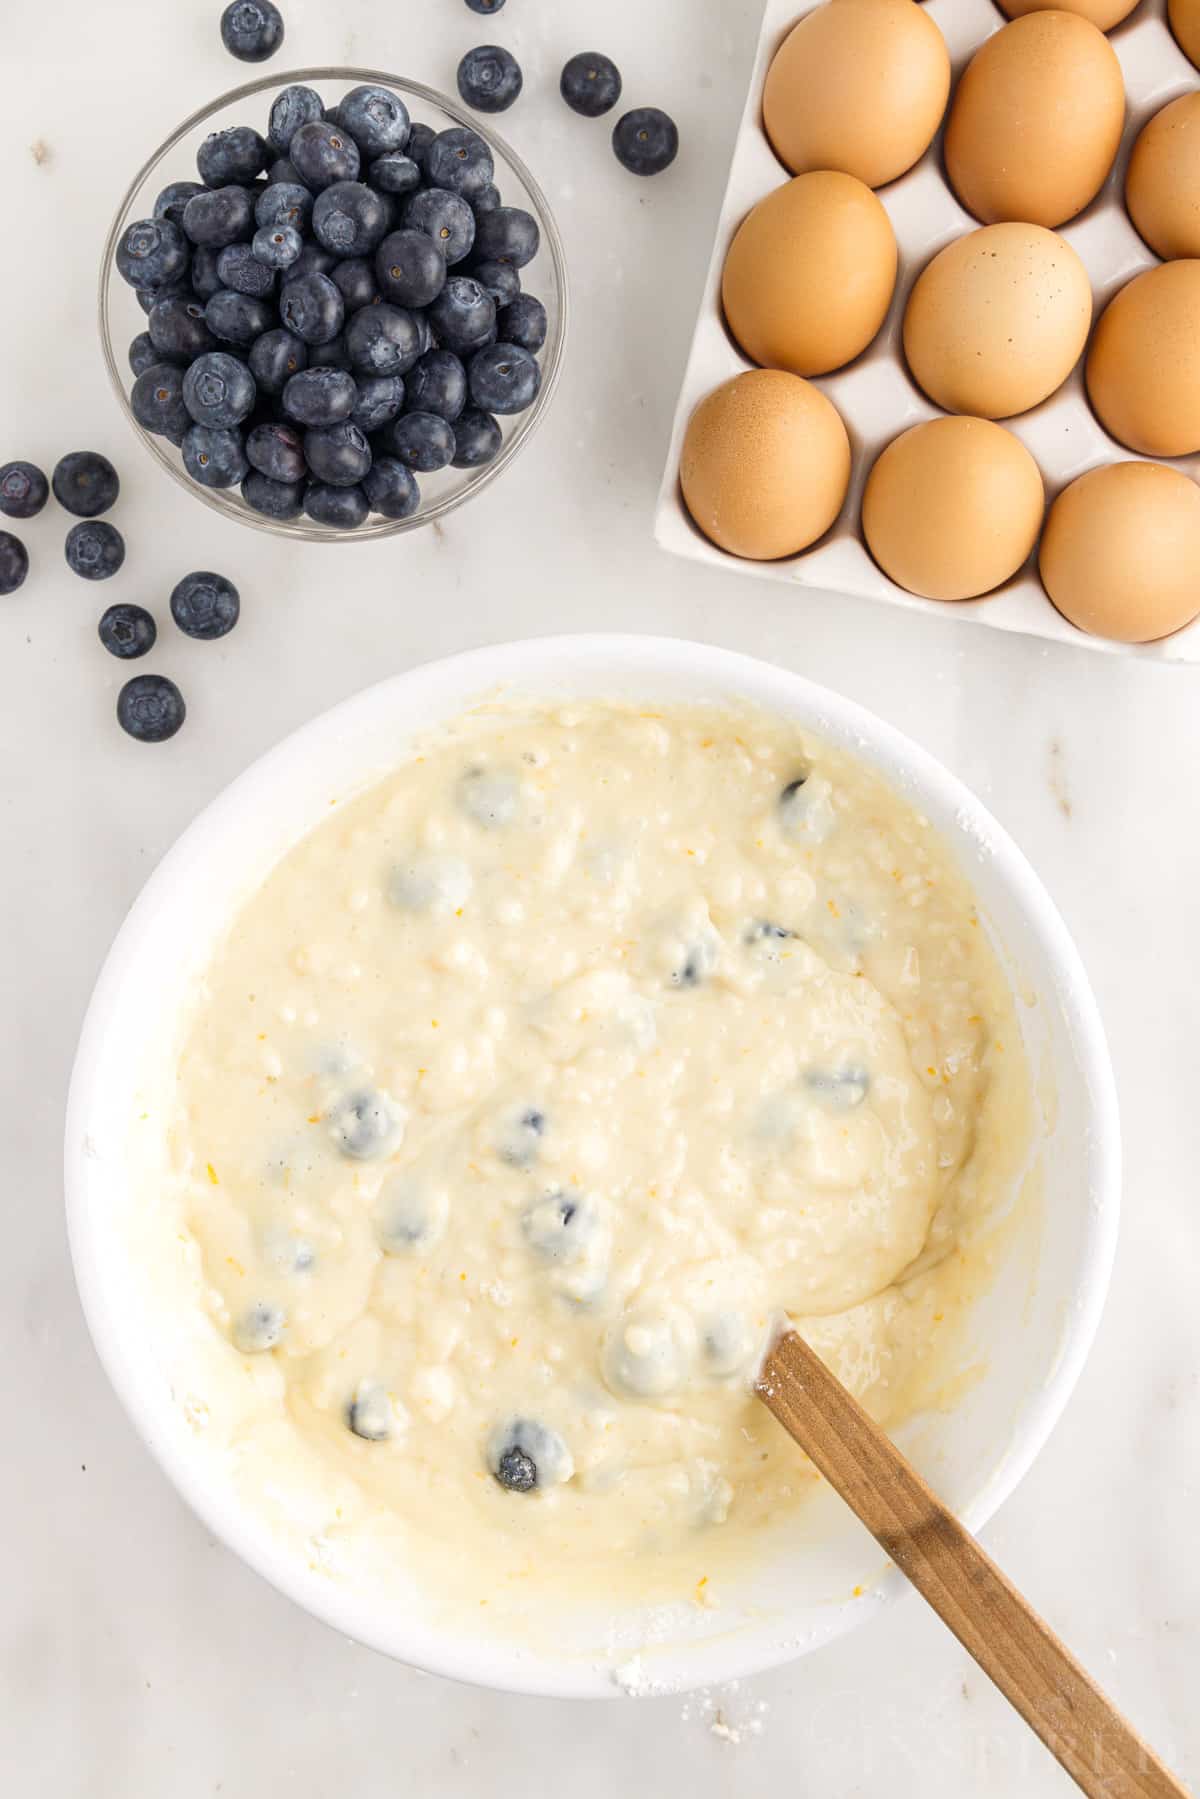 Blueberries mixed into Lemon Blueberry Muffins batter.